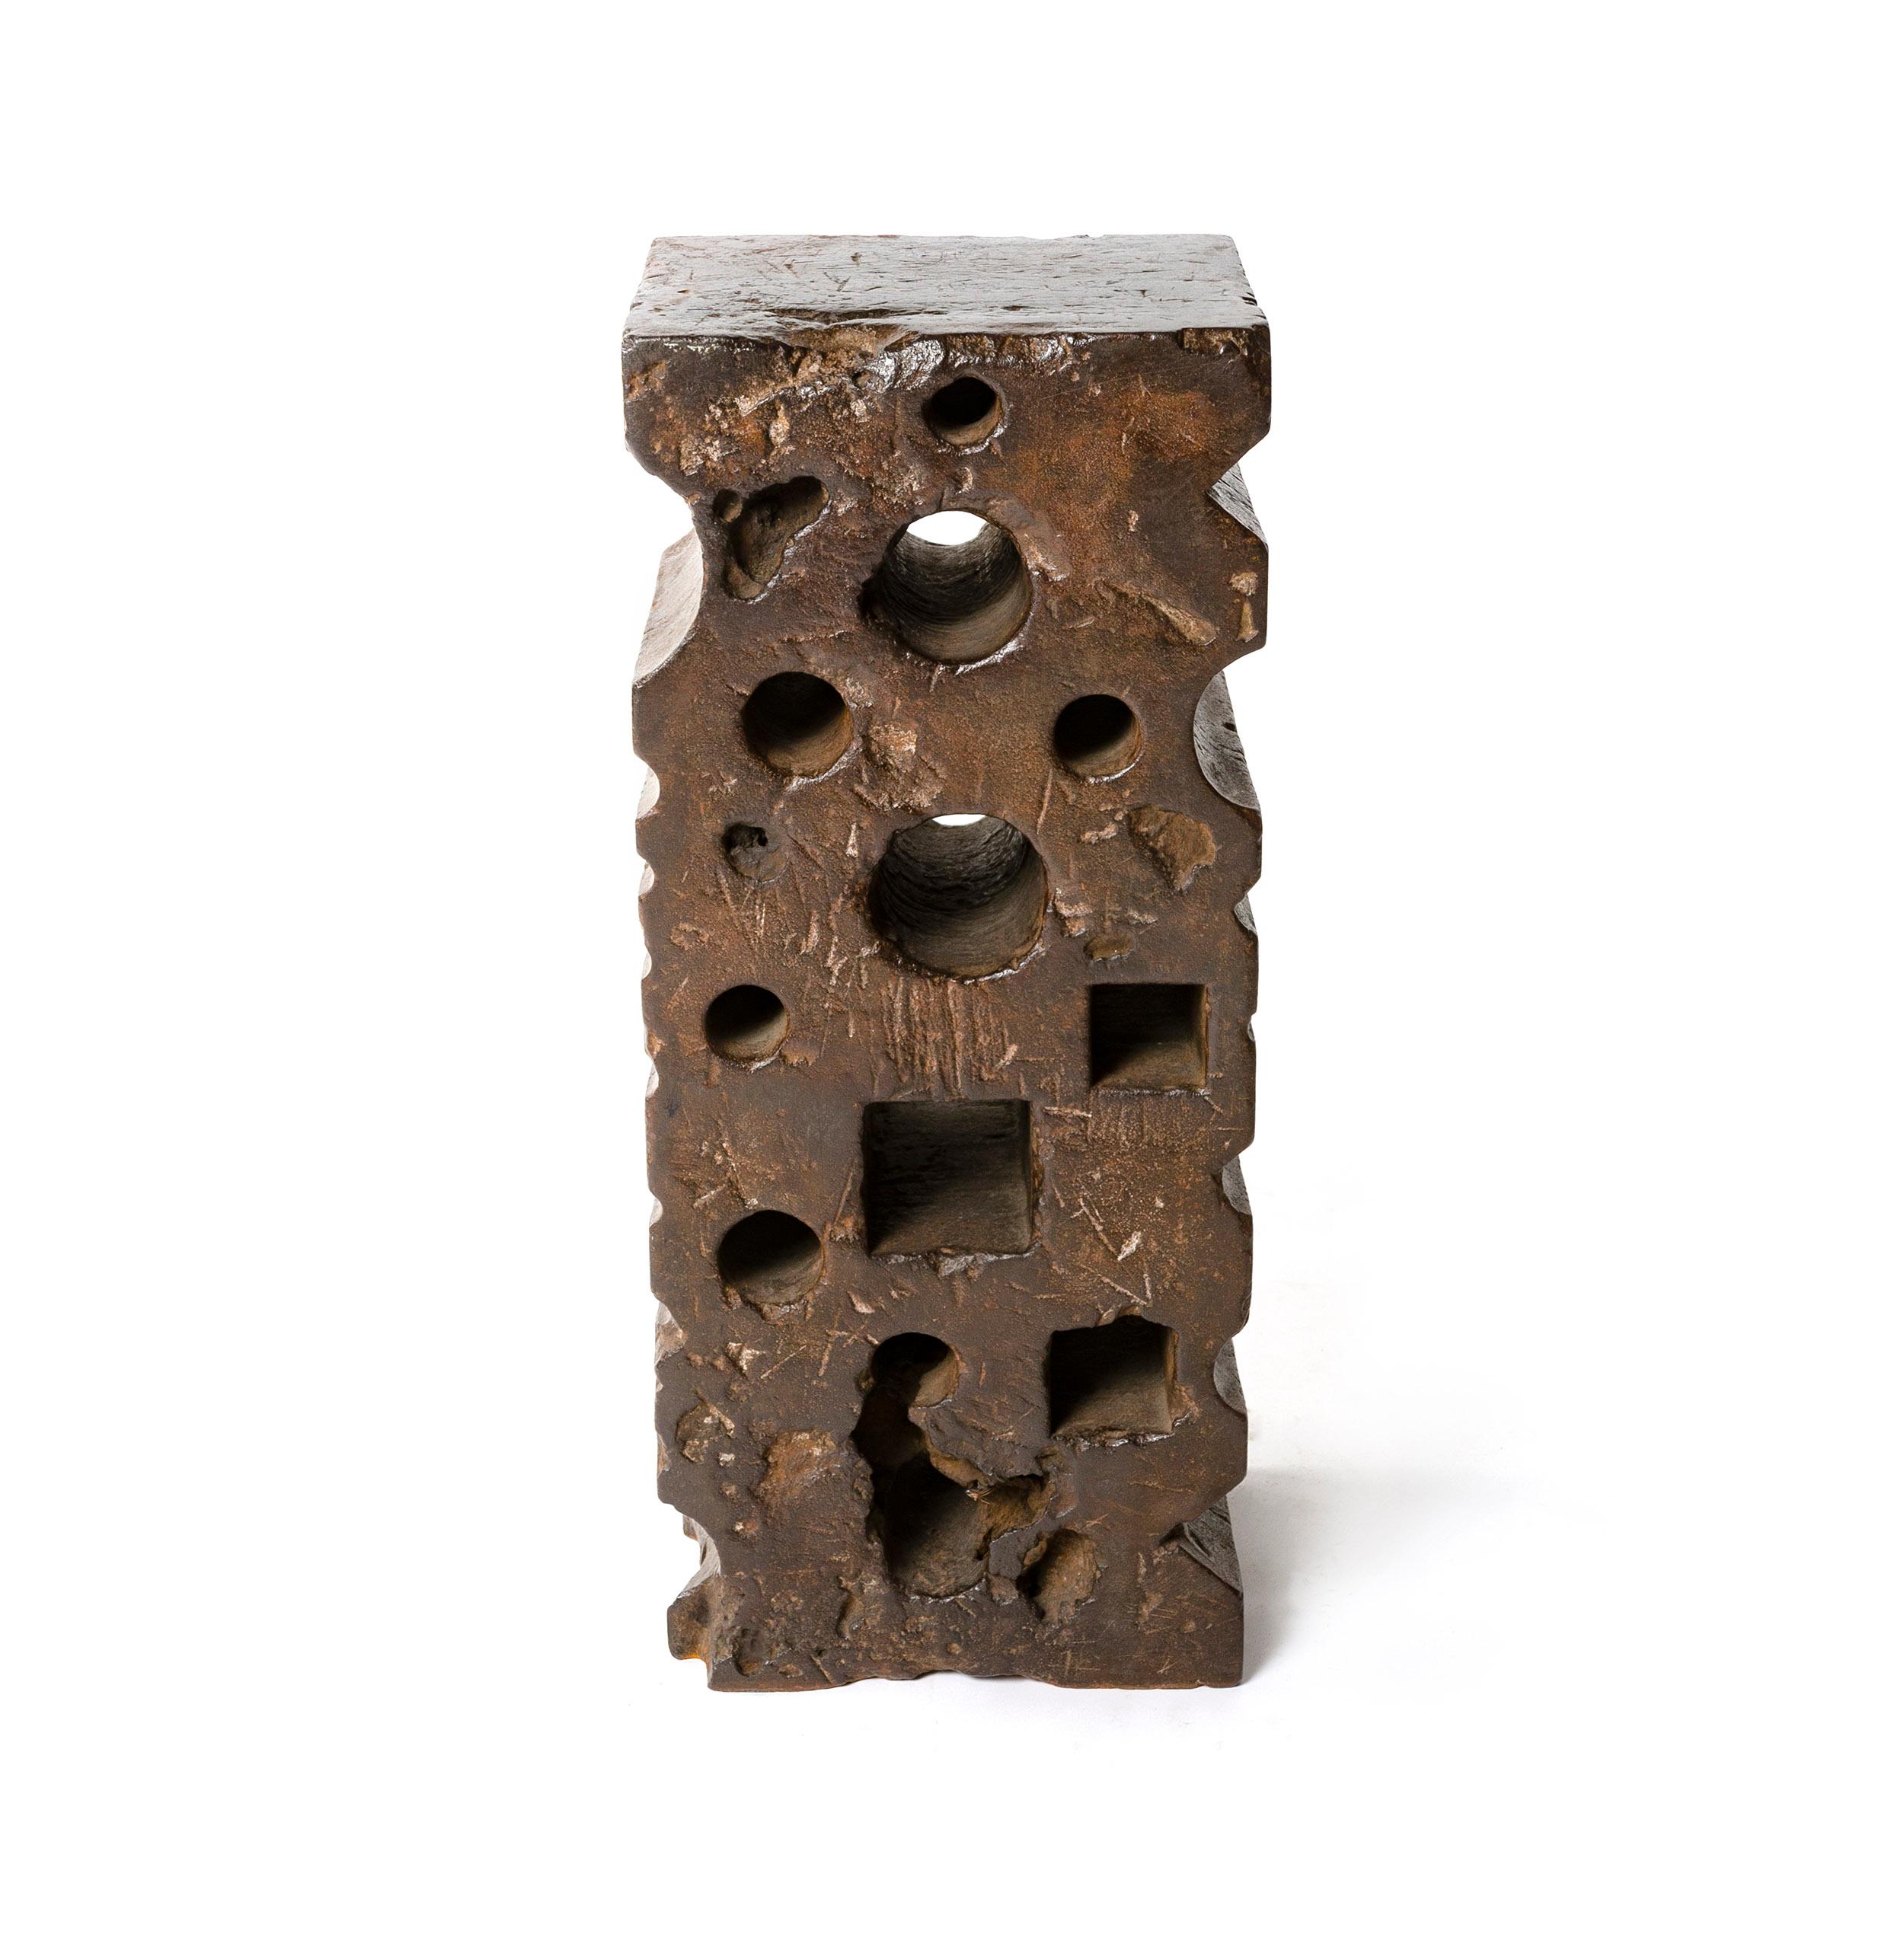 A vertical cast iron swage block.